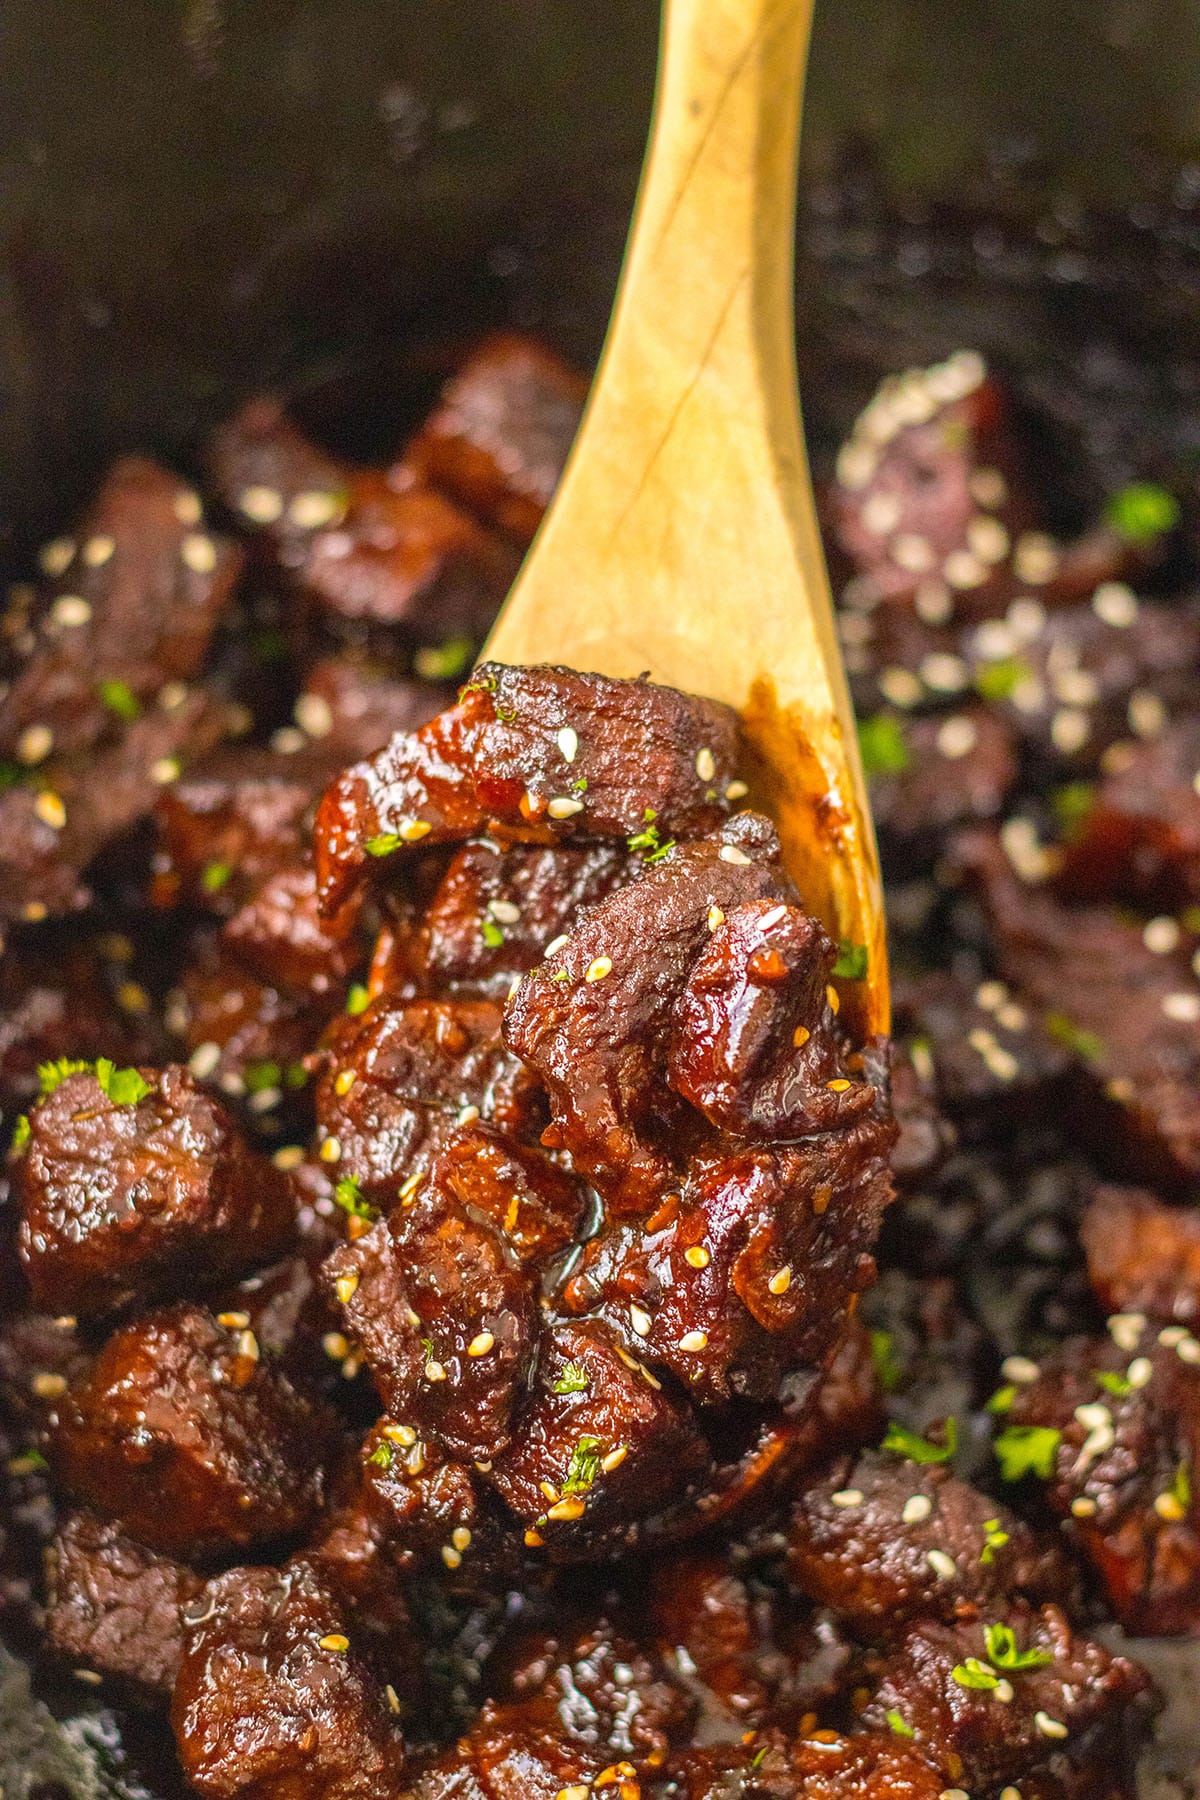 Tasty look of the steak bites with a wooden ladle
